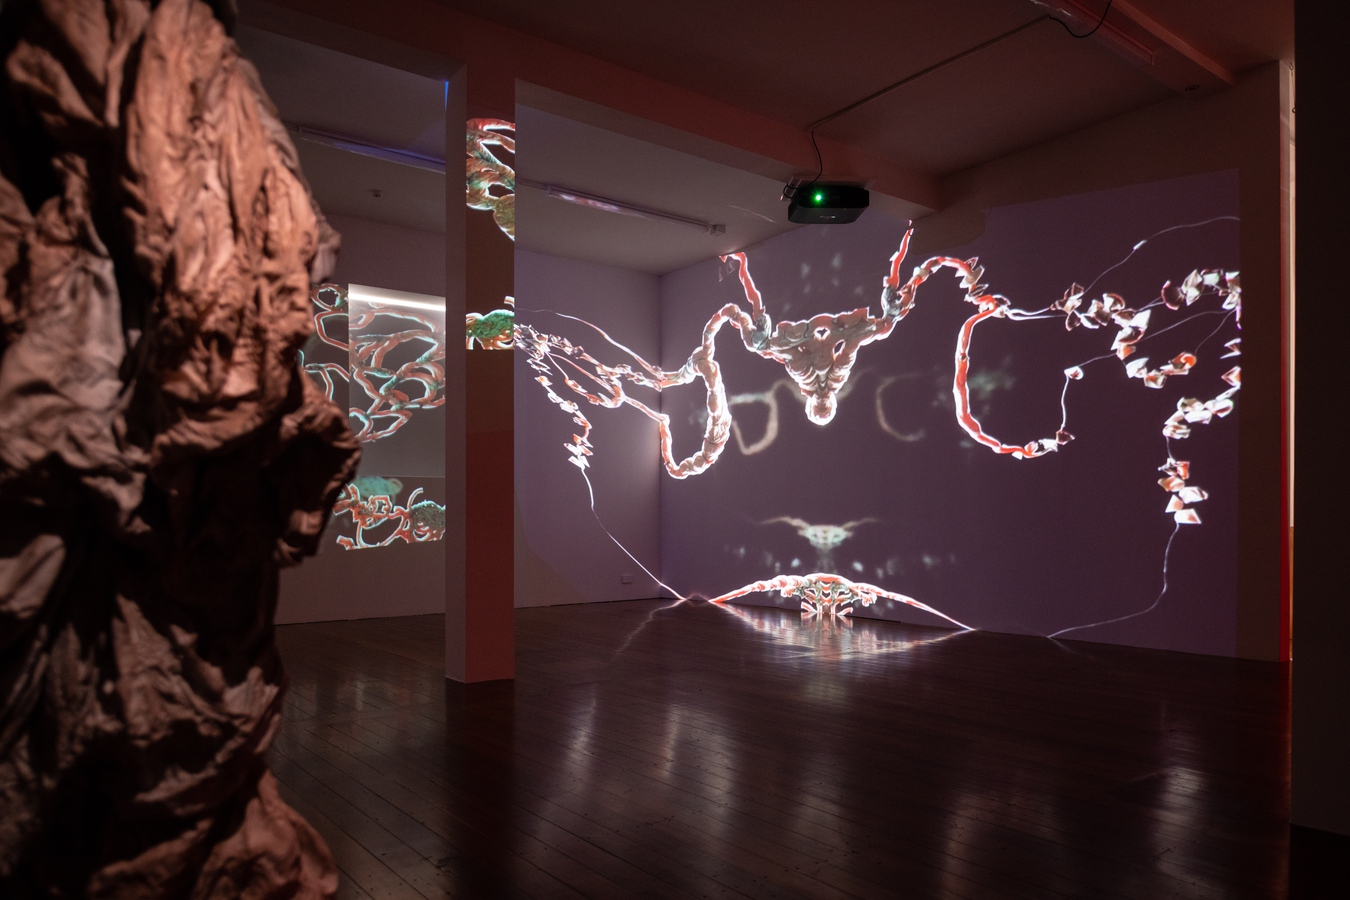 Jahra Wasasala, KALOUGATA: under the earth (installation view), 2022. With Navi Fong (VOU), Henry Lai-Pyne, Harrison Hall, Ooshcon, Steven Junil Park (6x4), and Oliva Luki (a.k.a. Spewer). Photo by Stuart Lloyd-Harris.